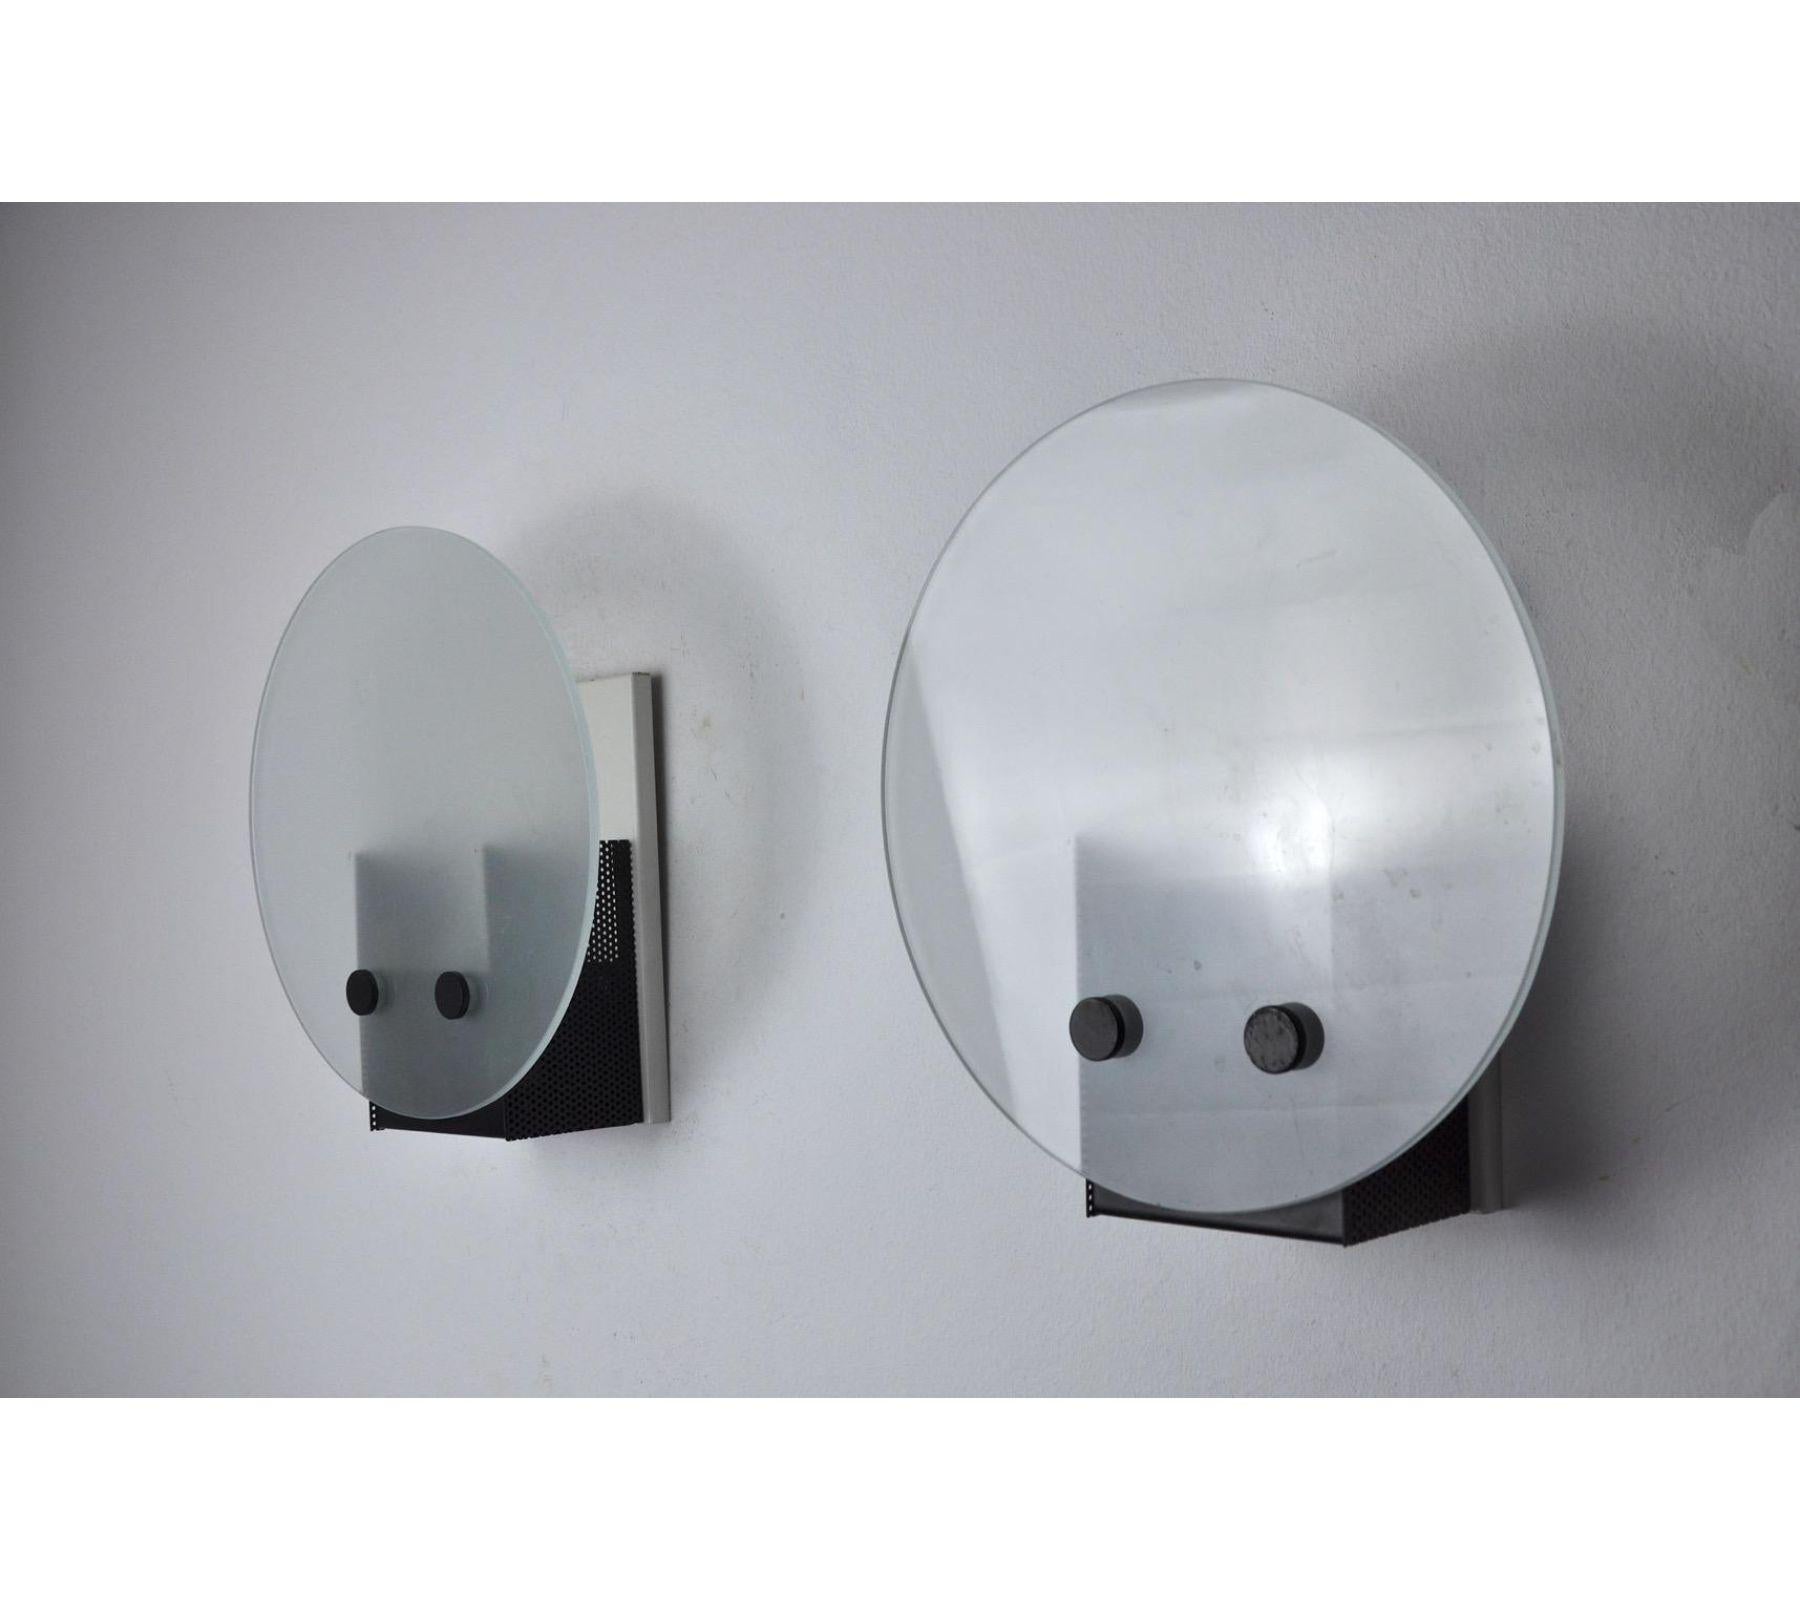 1970s Memphis Styled Wall Lamps, Spain, a Pair For Sale 1